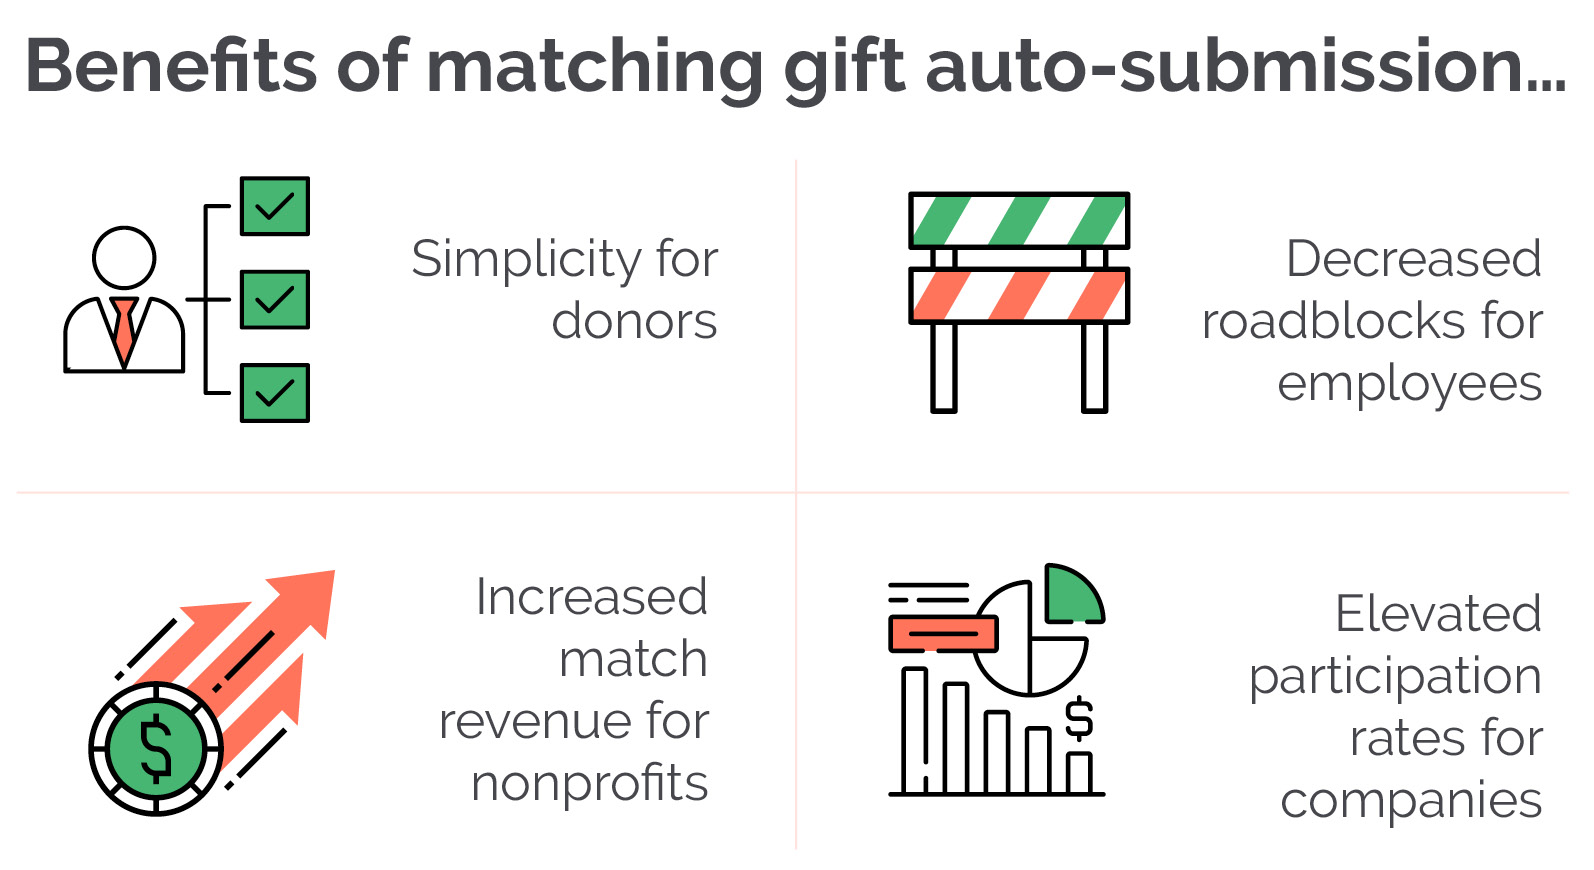 Benefits of auto-submission and matching gift form e-sign